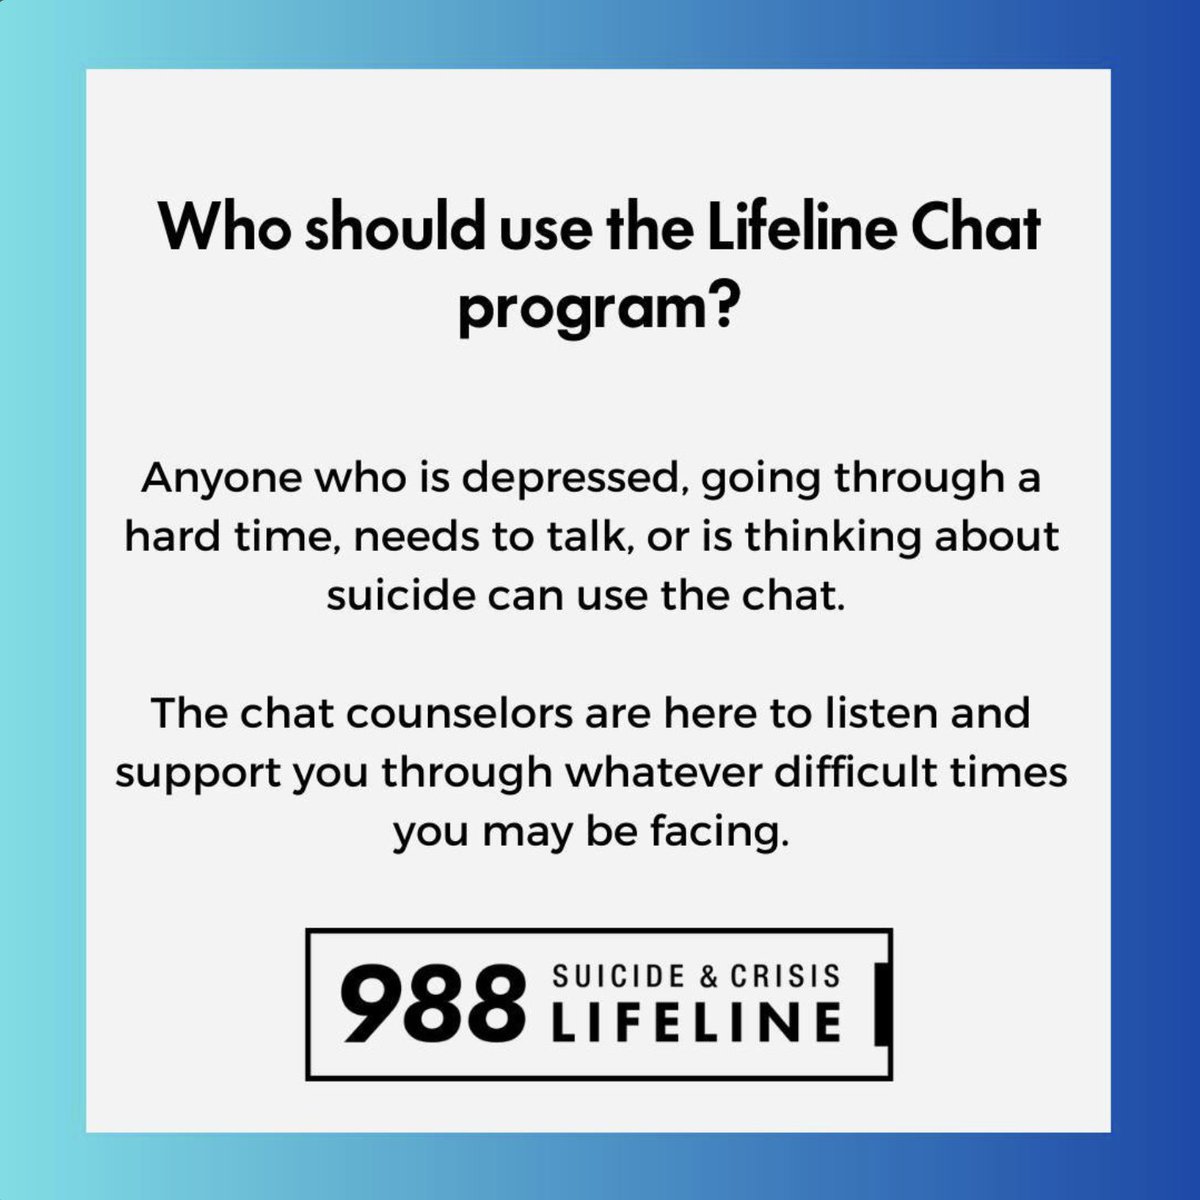 Q: Who should use the Lifeline Chat program? A: Anyone who is depressed, going through a hard time, needs to talk, or is thinking about suicide can use the chat. 💬 The chat counselors are here to listen and support you through whatever difficult times you may be facing.